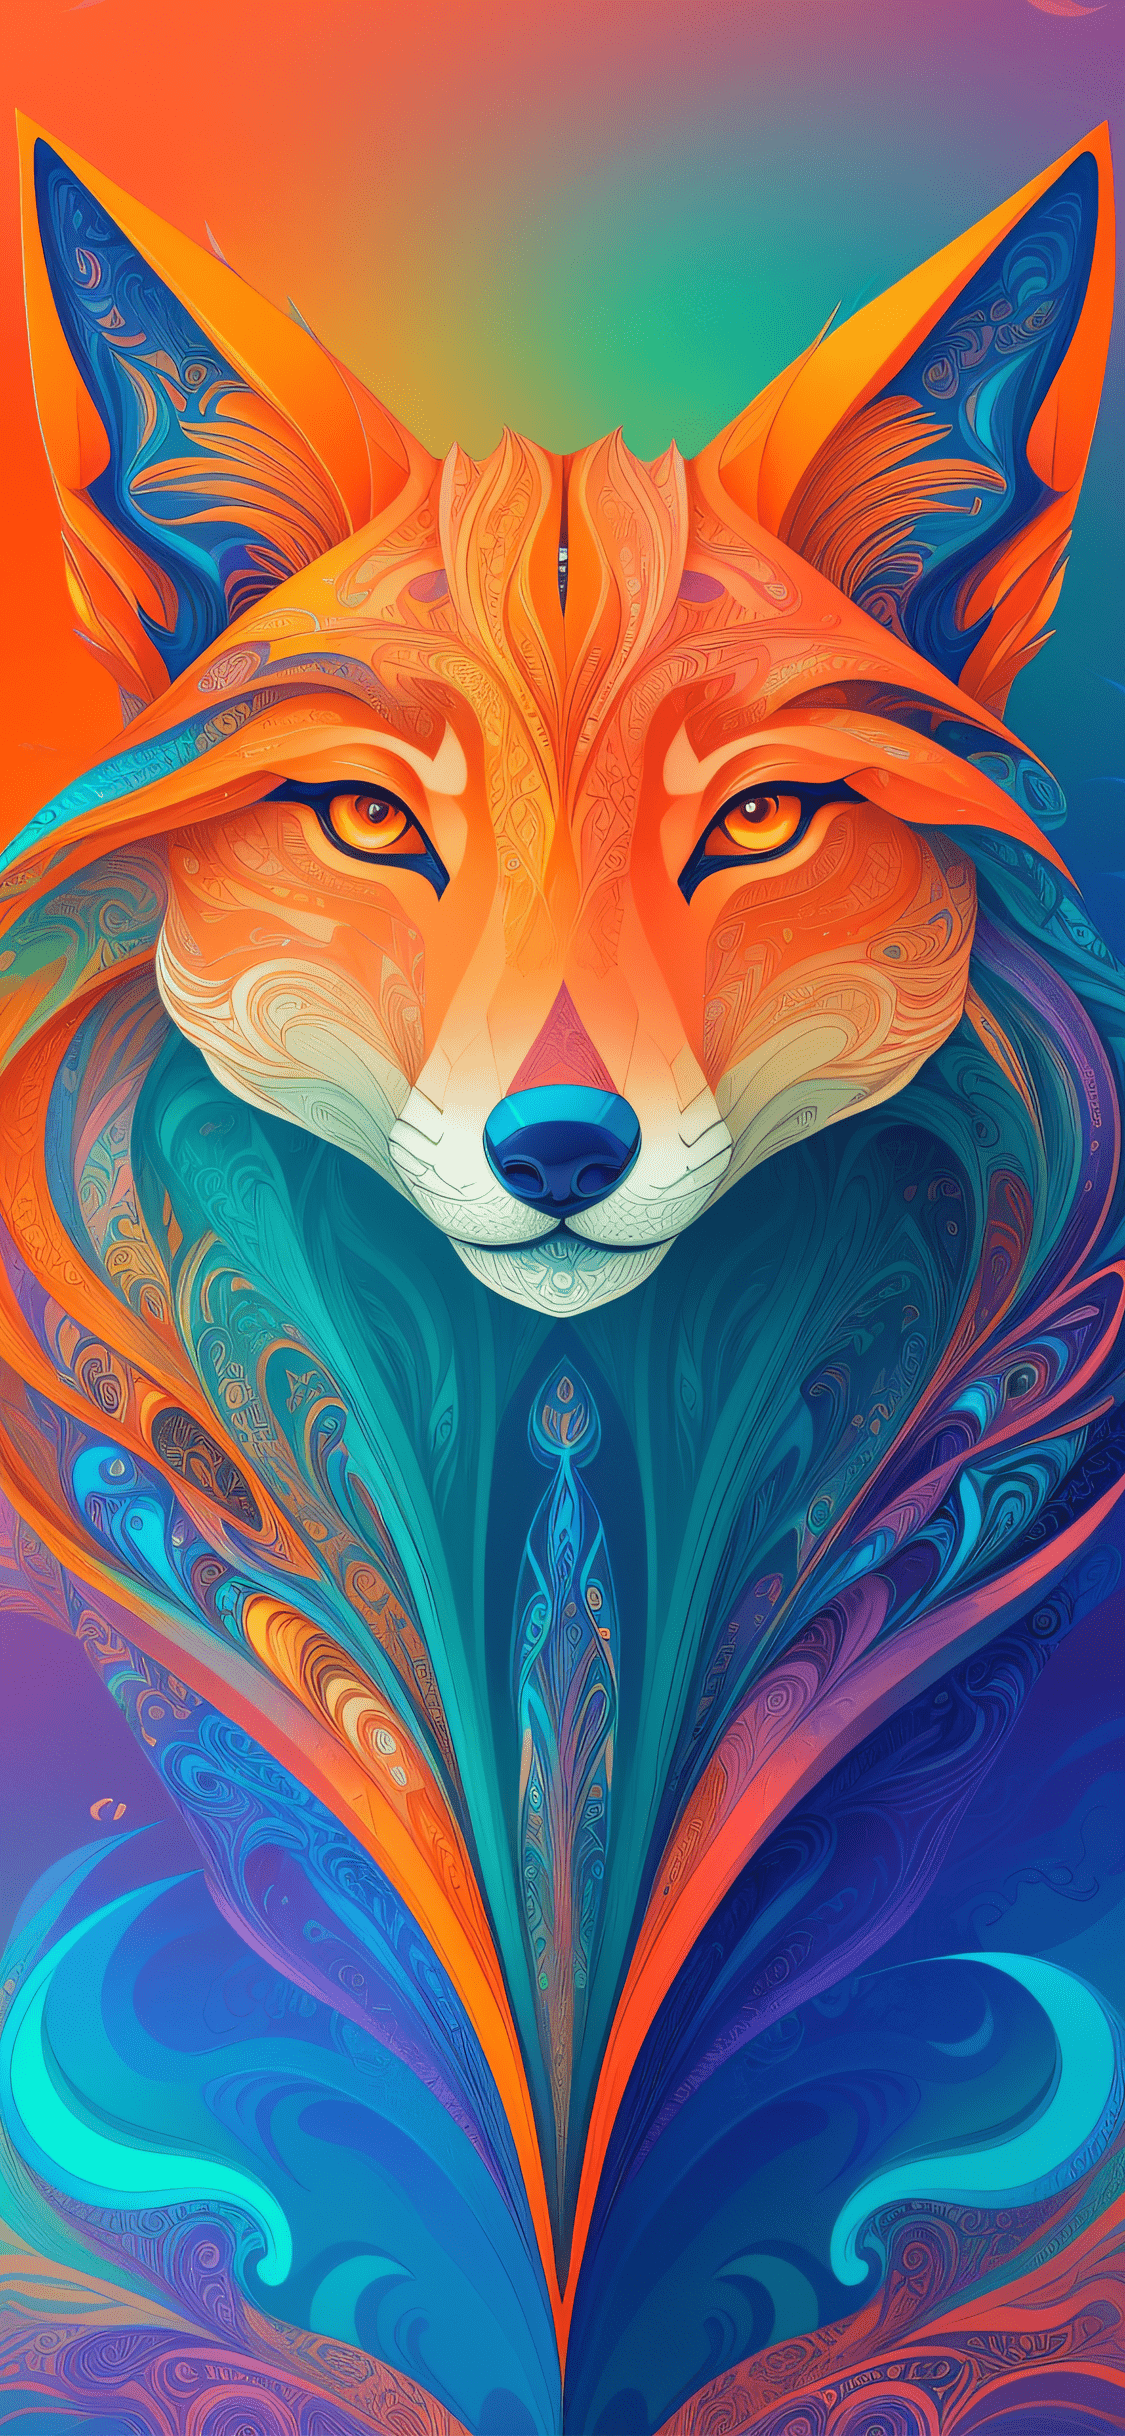 My Fox Poster Design for iPhone Wallpaper, Checkout my website for more